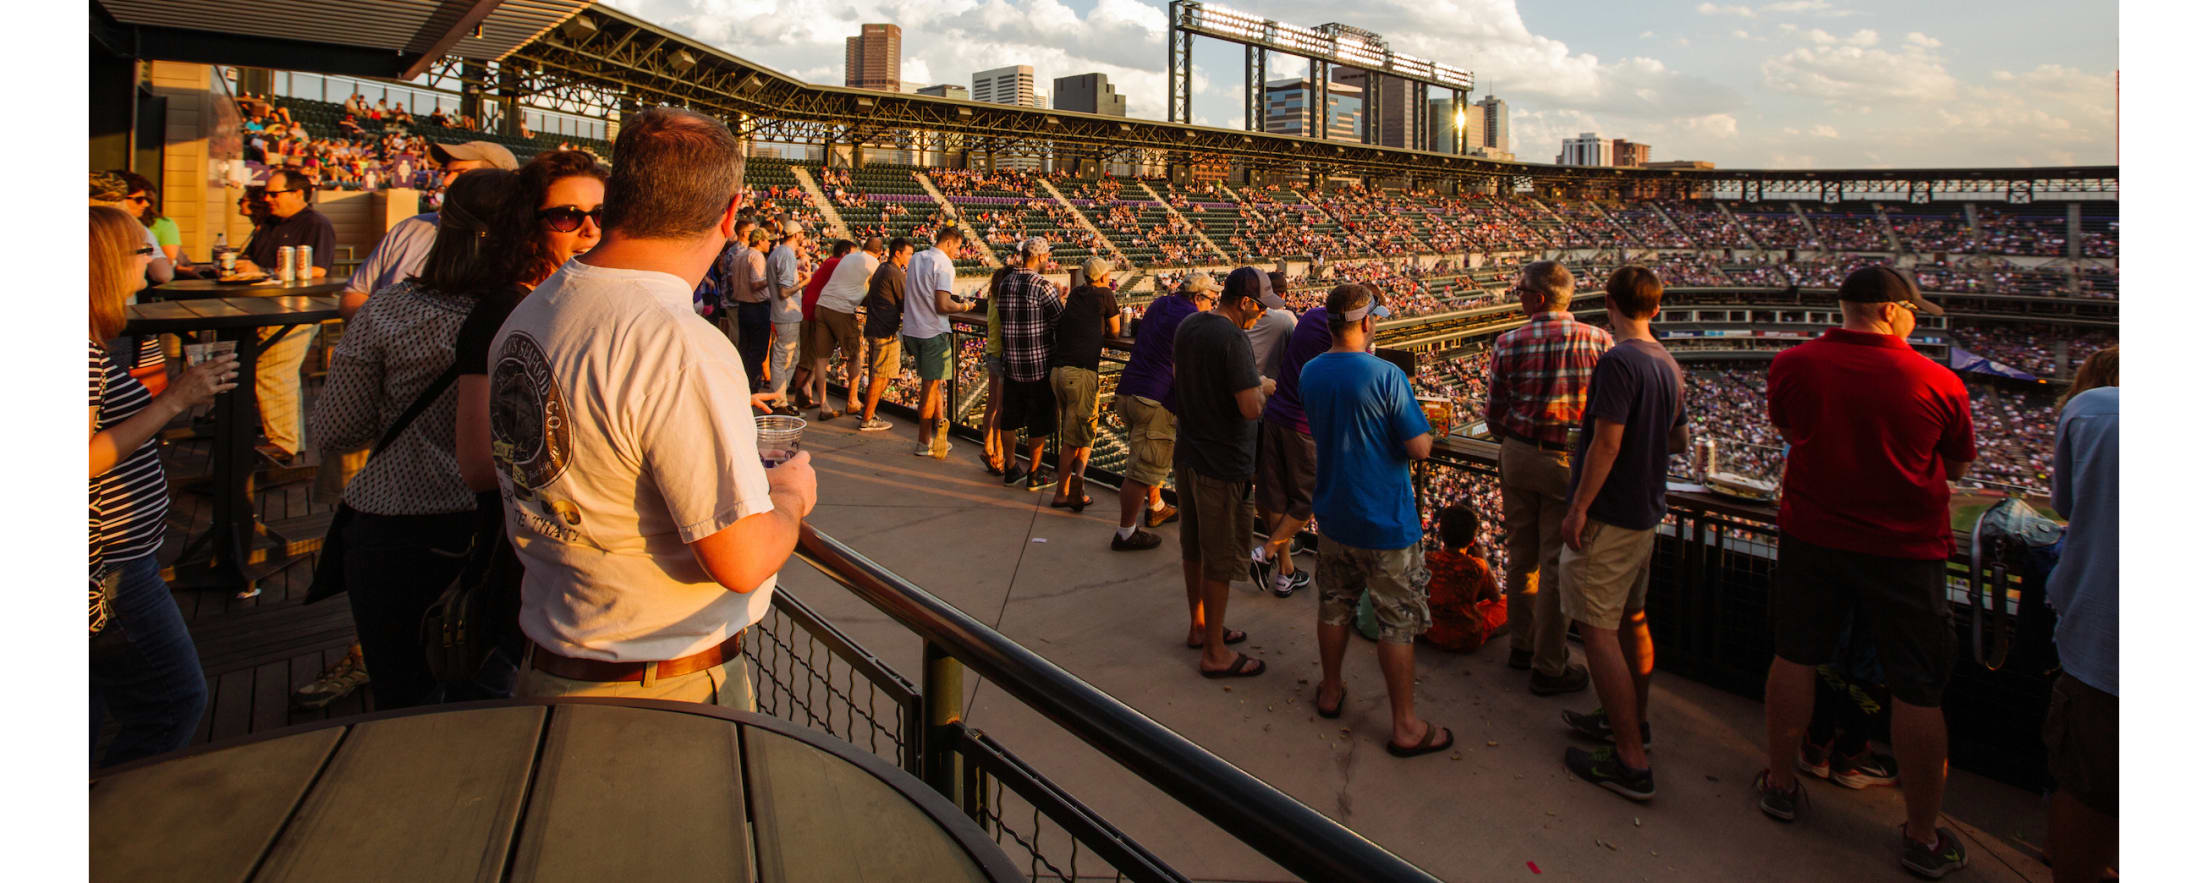 Rockies reveal how “LoDo” they can go with Coors Field rooftop deck – The  Denver Post